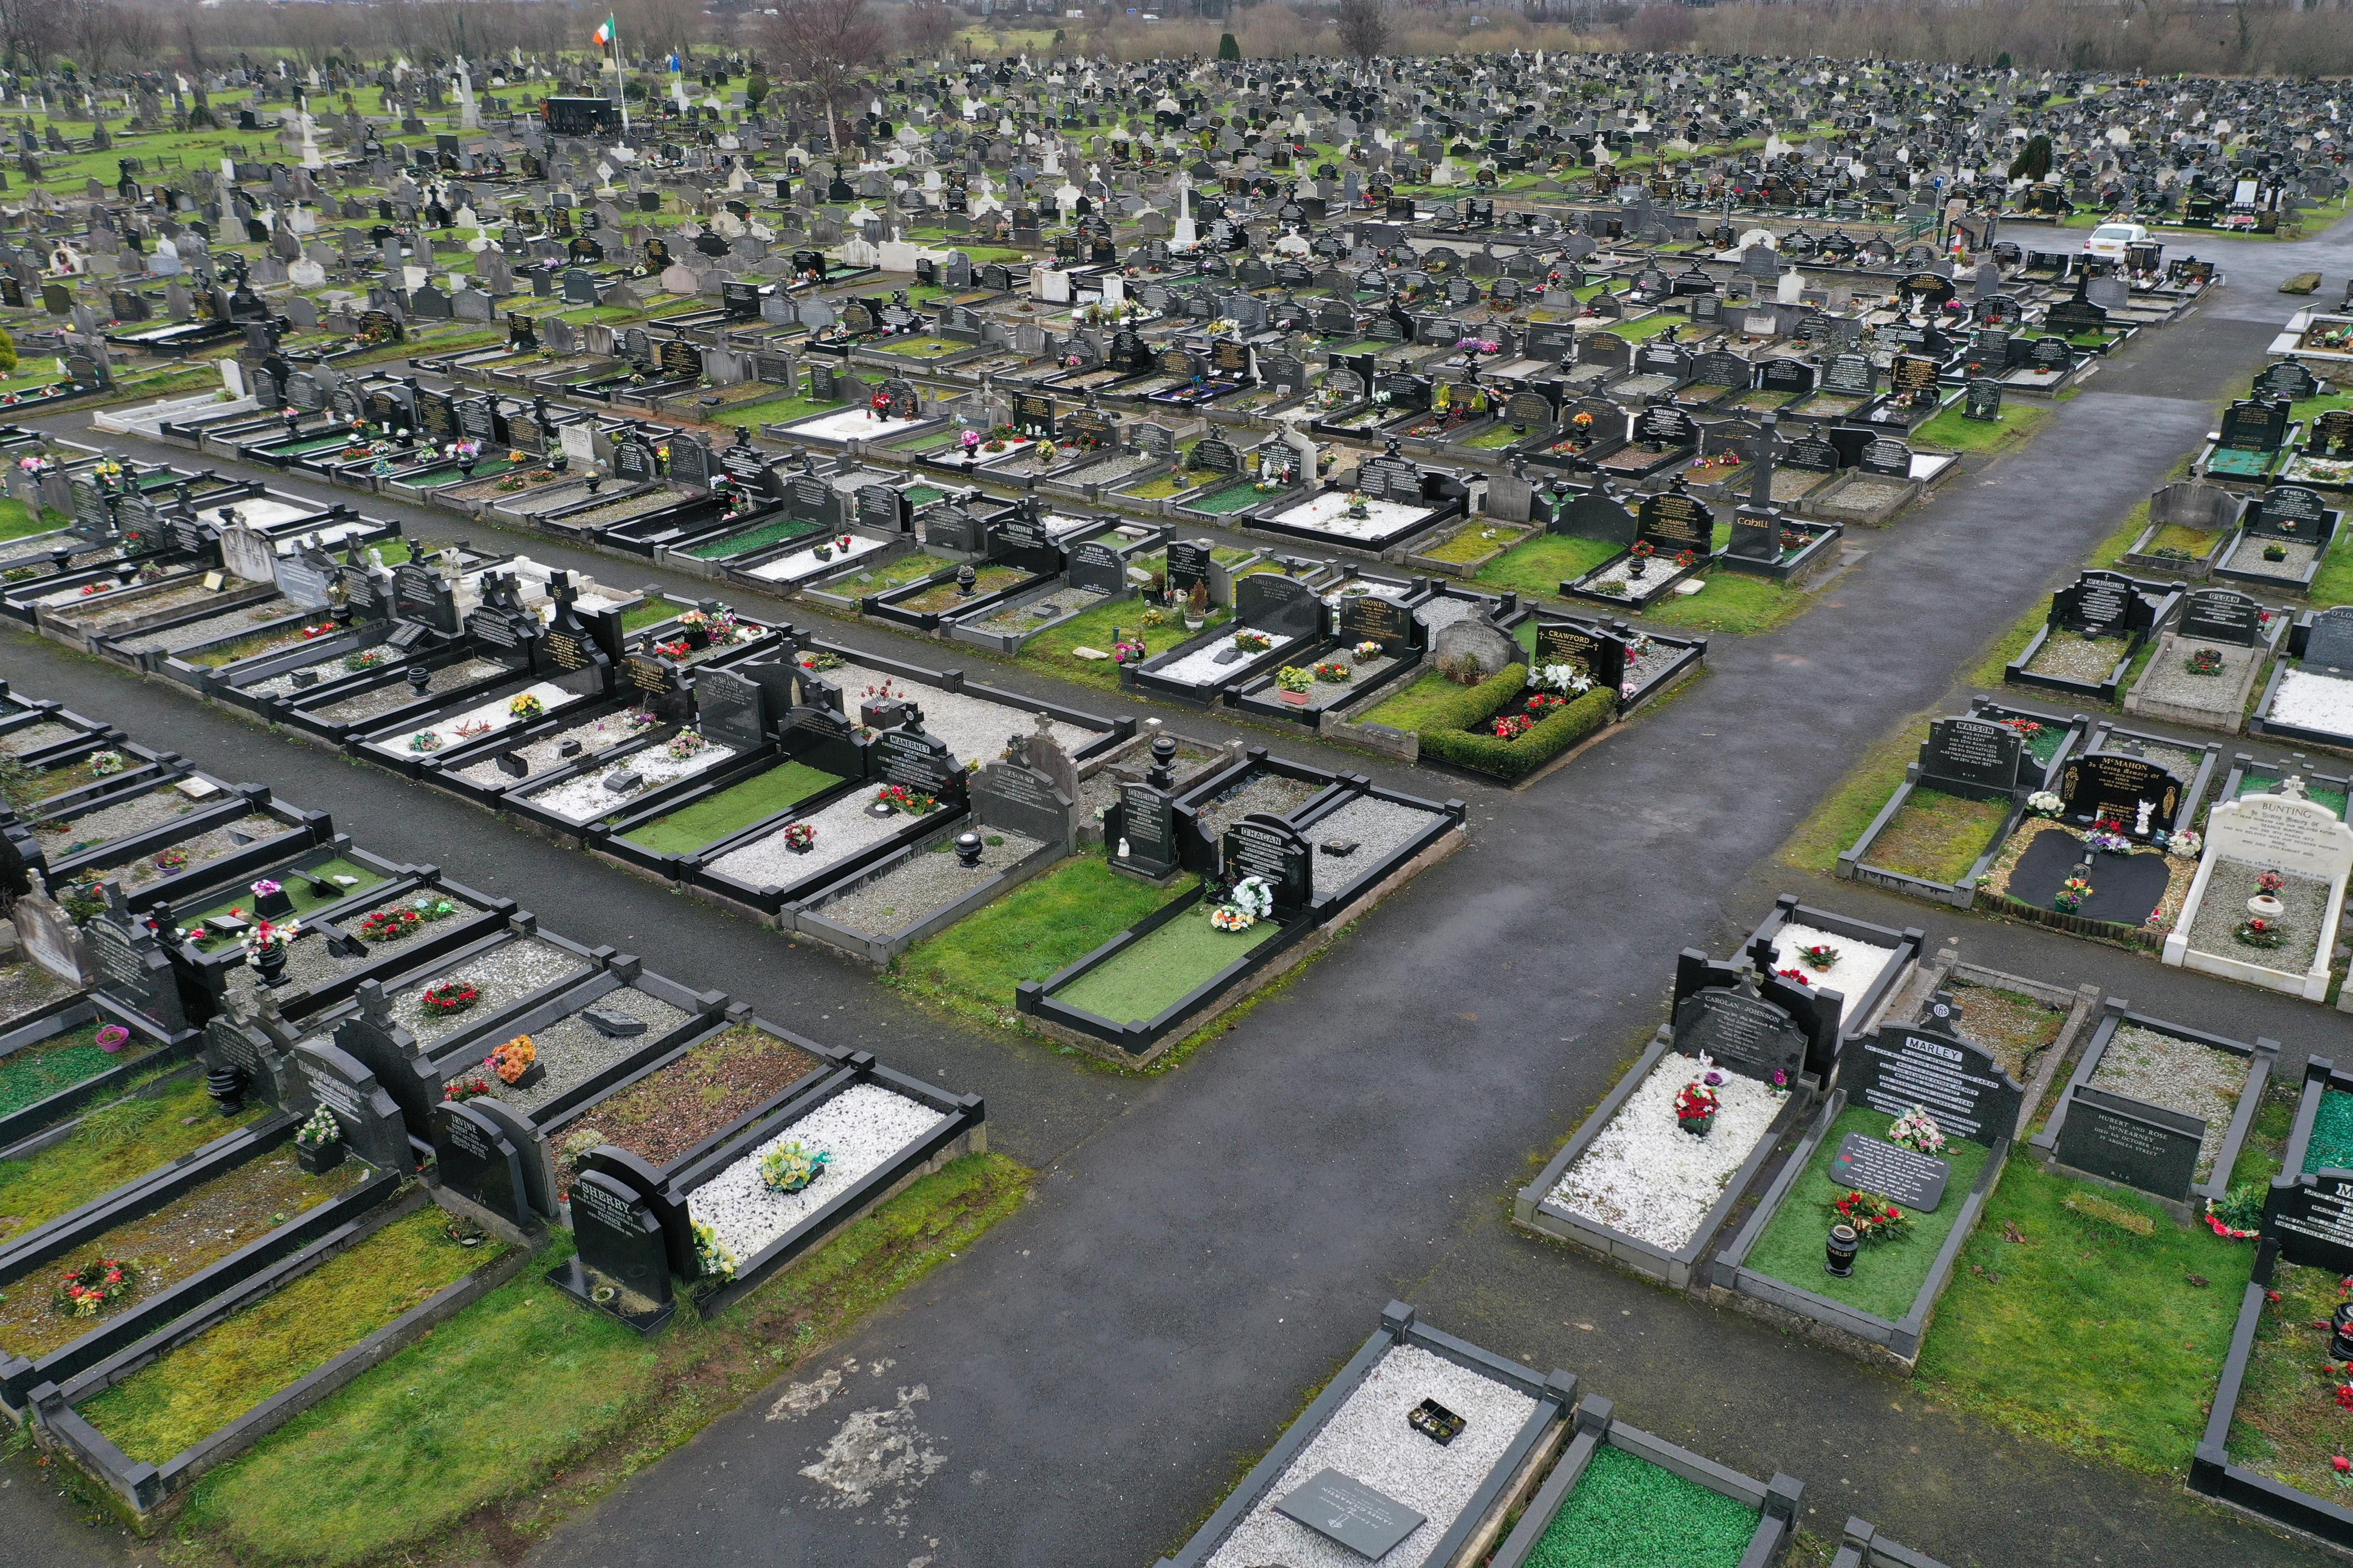 MUGGED: An elderly man was robbed while visiting a family grave at Milltown Cemetery 